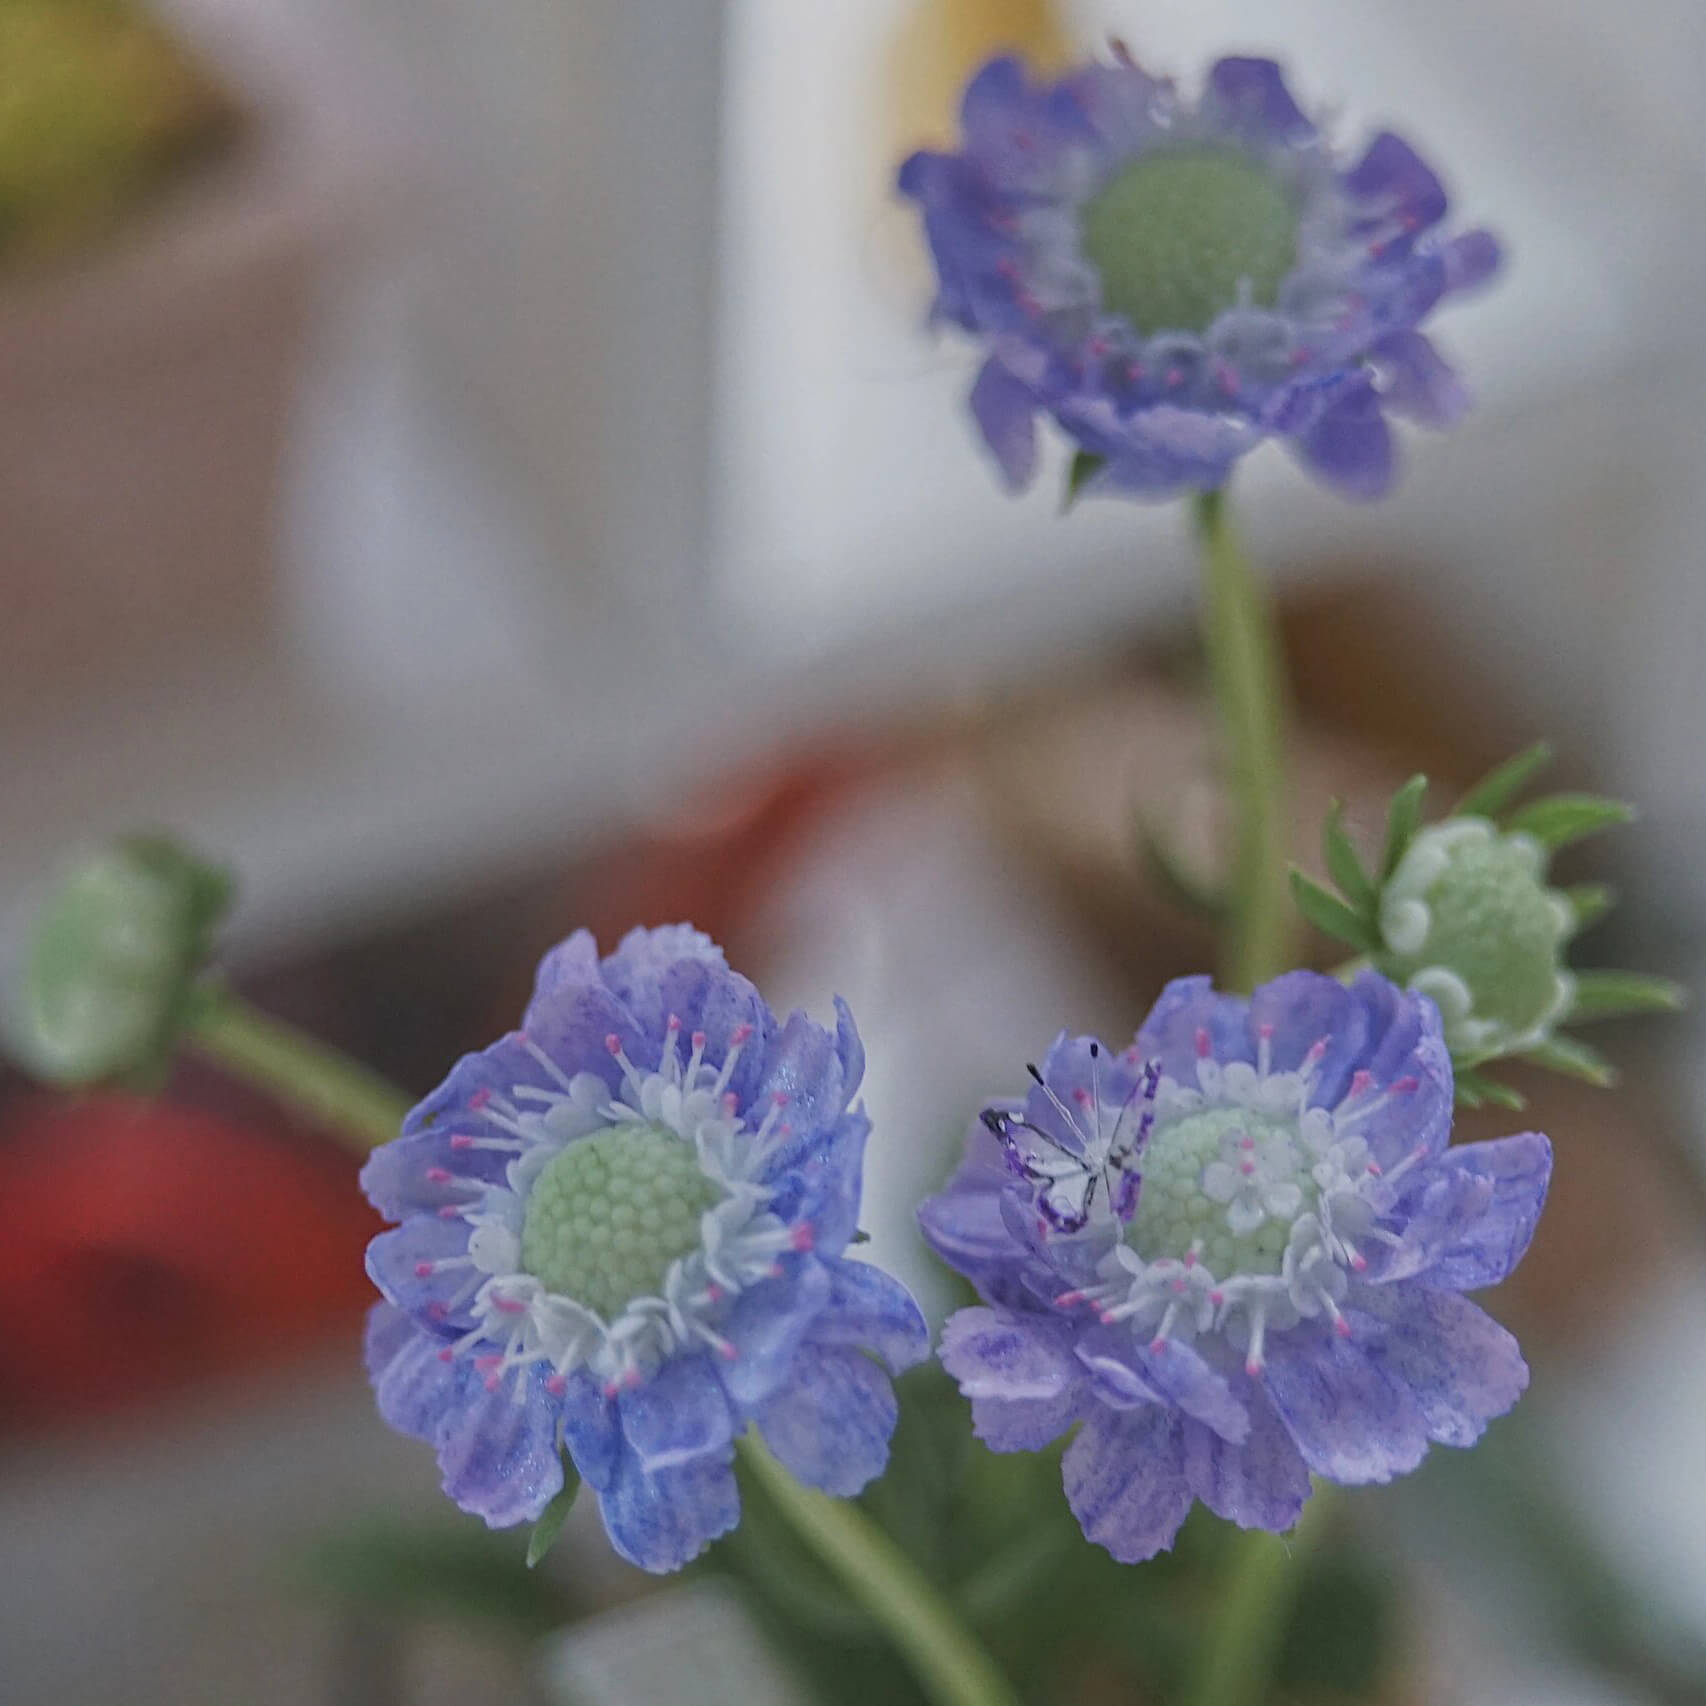 Scabiosa, also called pincushion flower, has a delicate appearance with whimsical, frilly skirts of petals and long, wiry stems—perfect for cutting and arranging in bouquets.  Material: Handmade from Clay